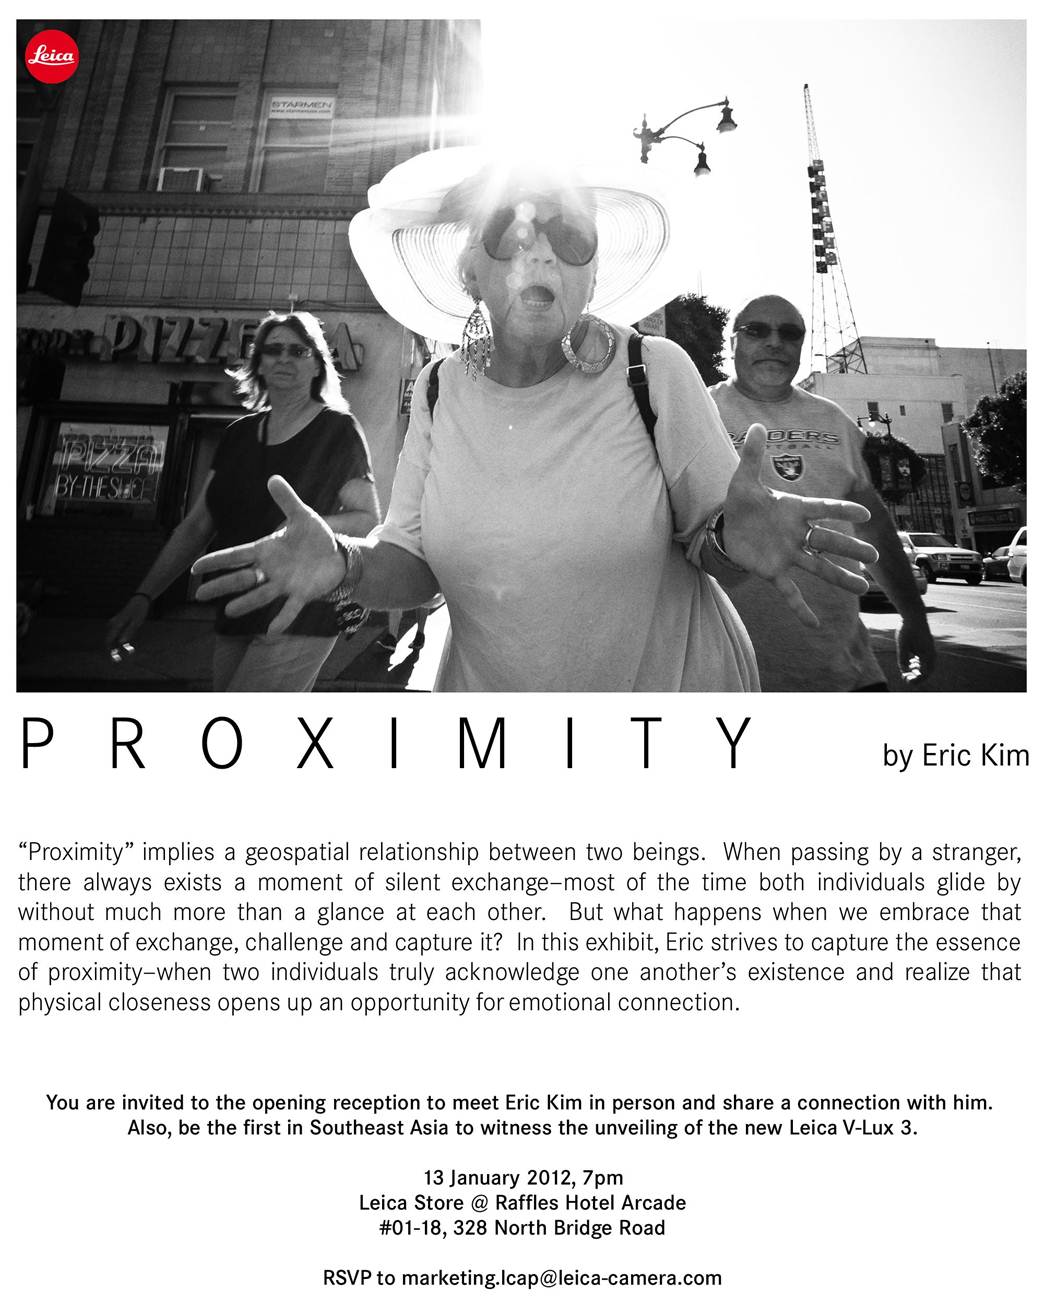 “Proximity” Street Photography Exhibition + Advanced Workshop in Singapore 1/13-1/15